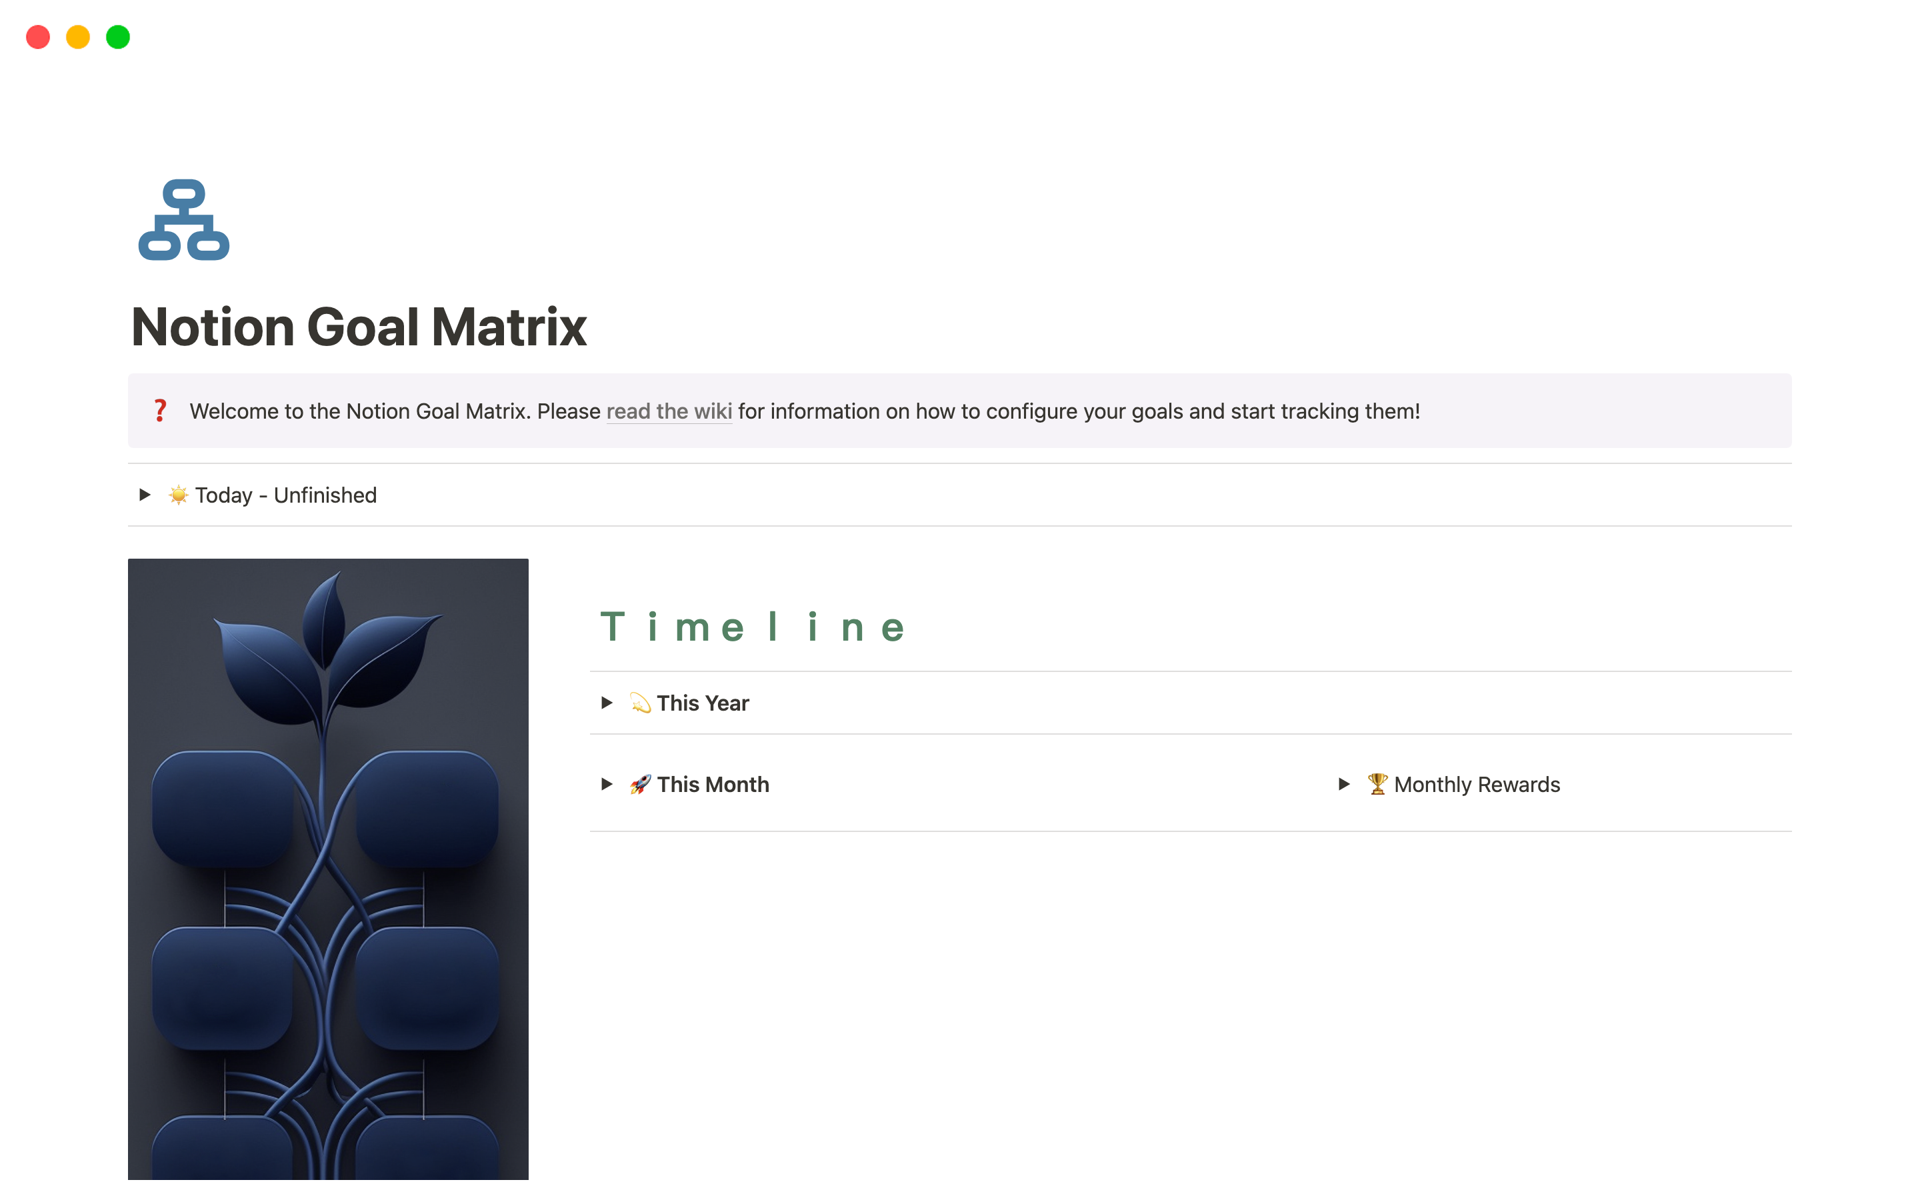 Notion Goal Matrix is a goal-setting template that connects daily tasks to a higher purpose.